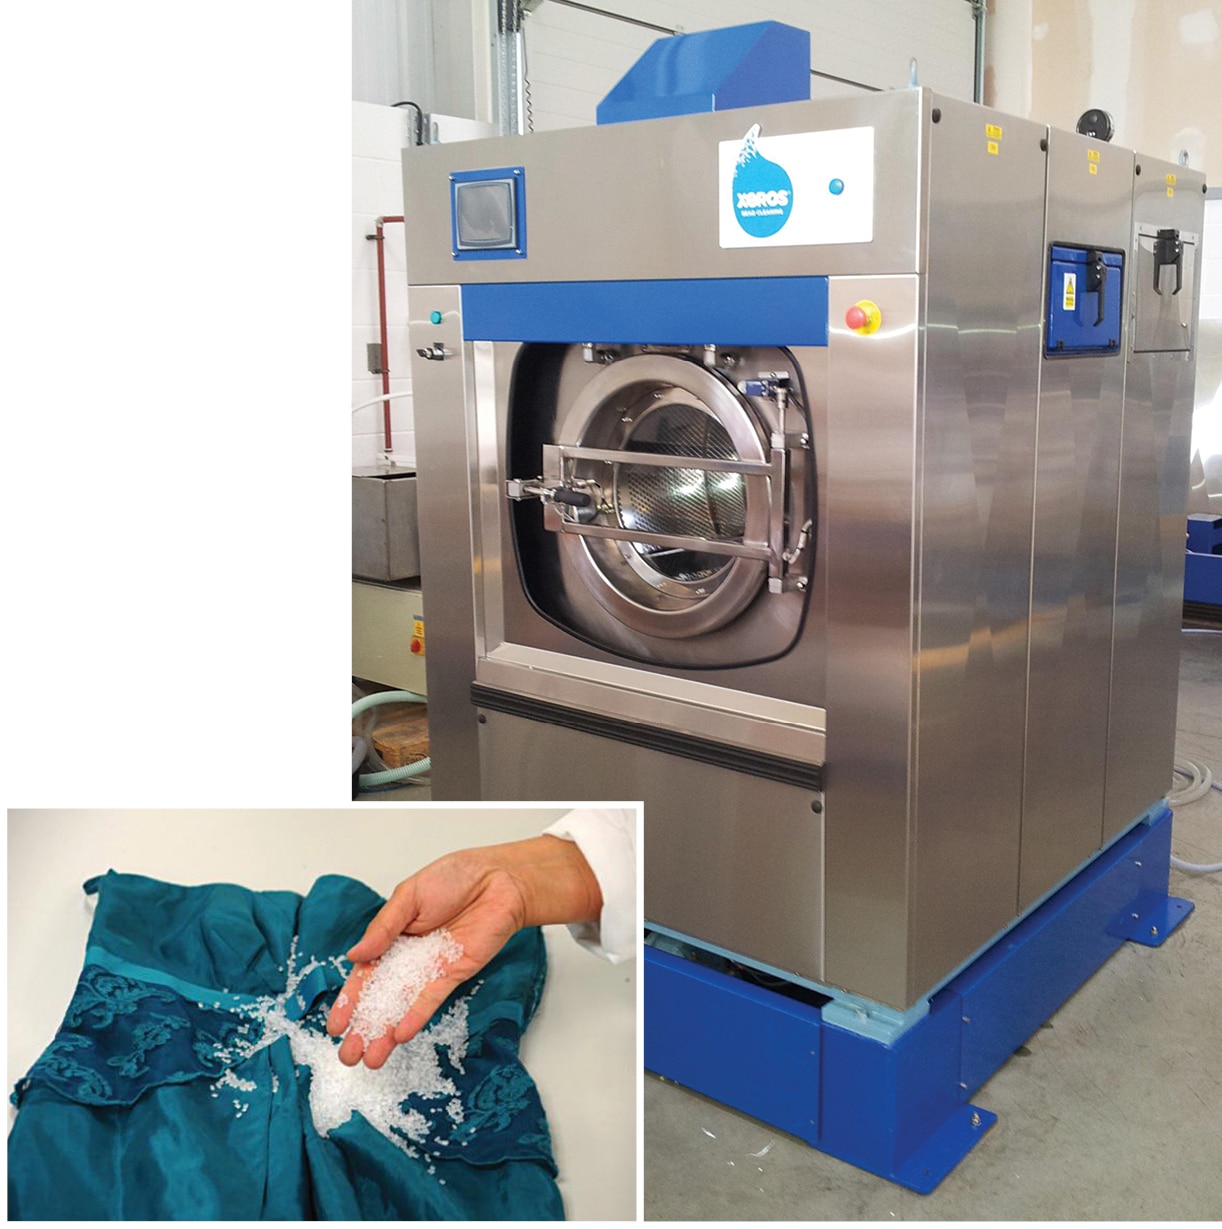 Nearly waterless washing machine (right) that uses nylon polymer beads (below) for washing thus conserving water (Credit: www.forbes.com)